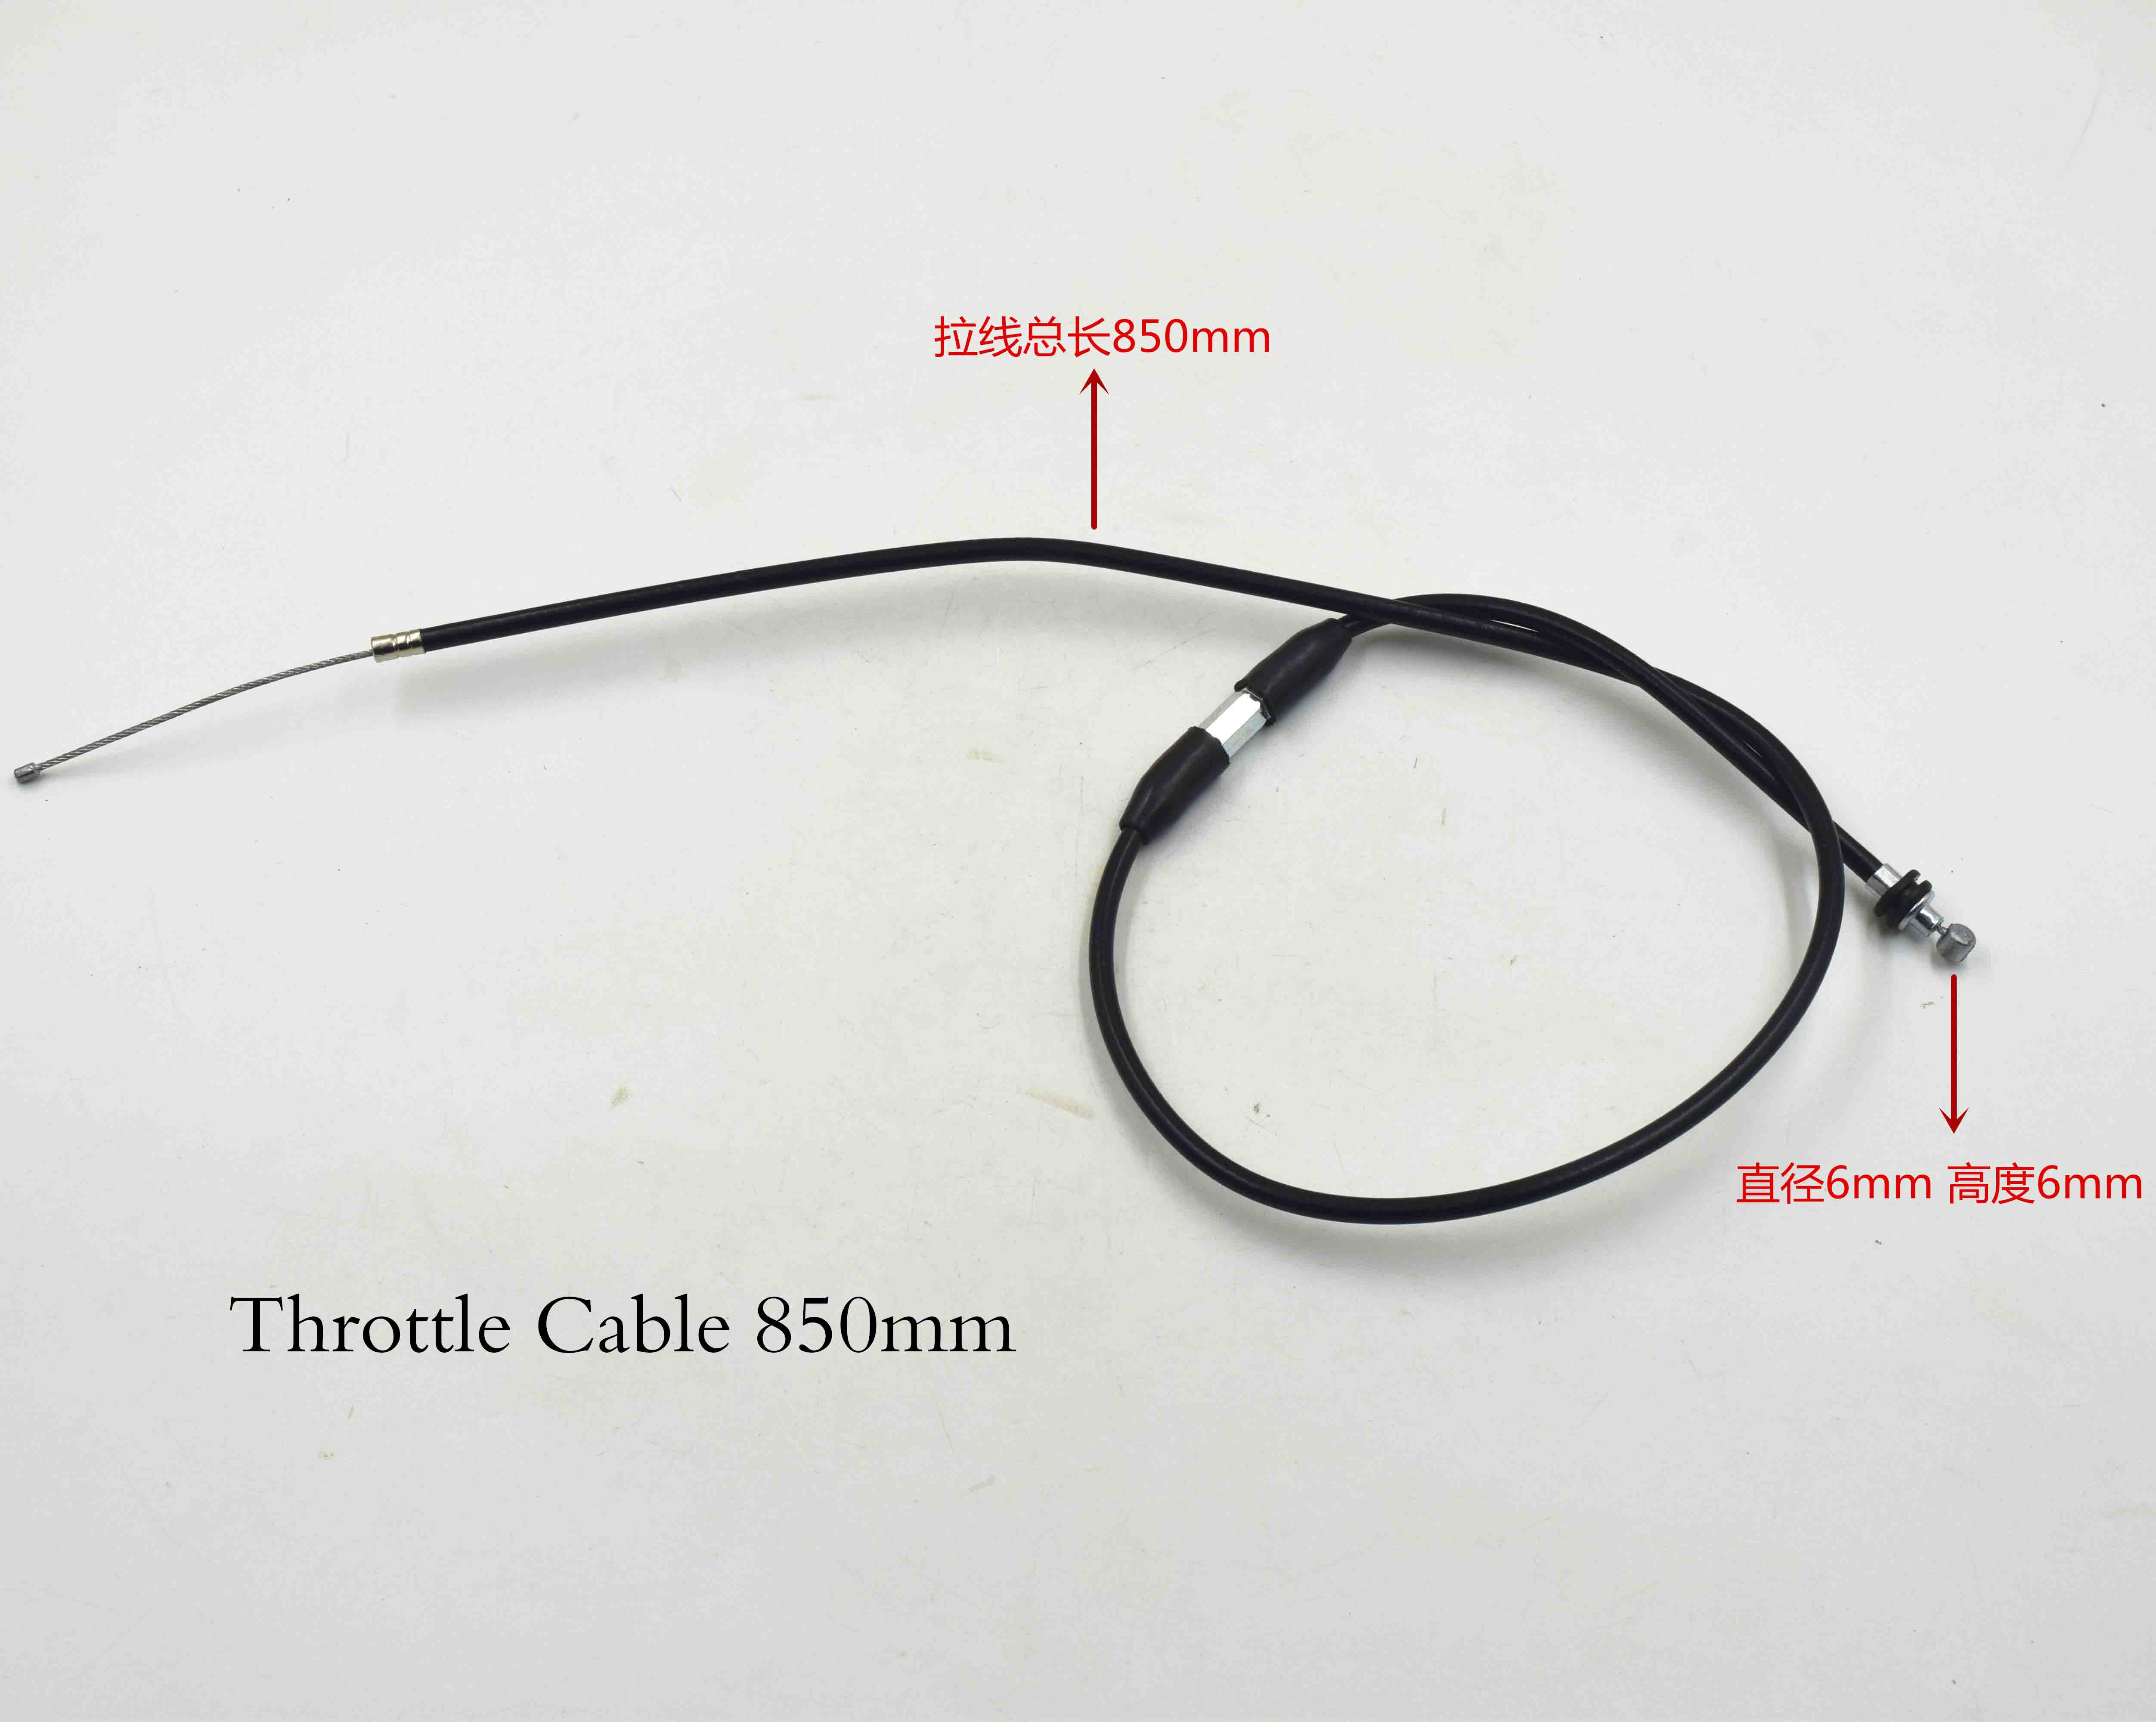 Throttle Cable 850mm 